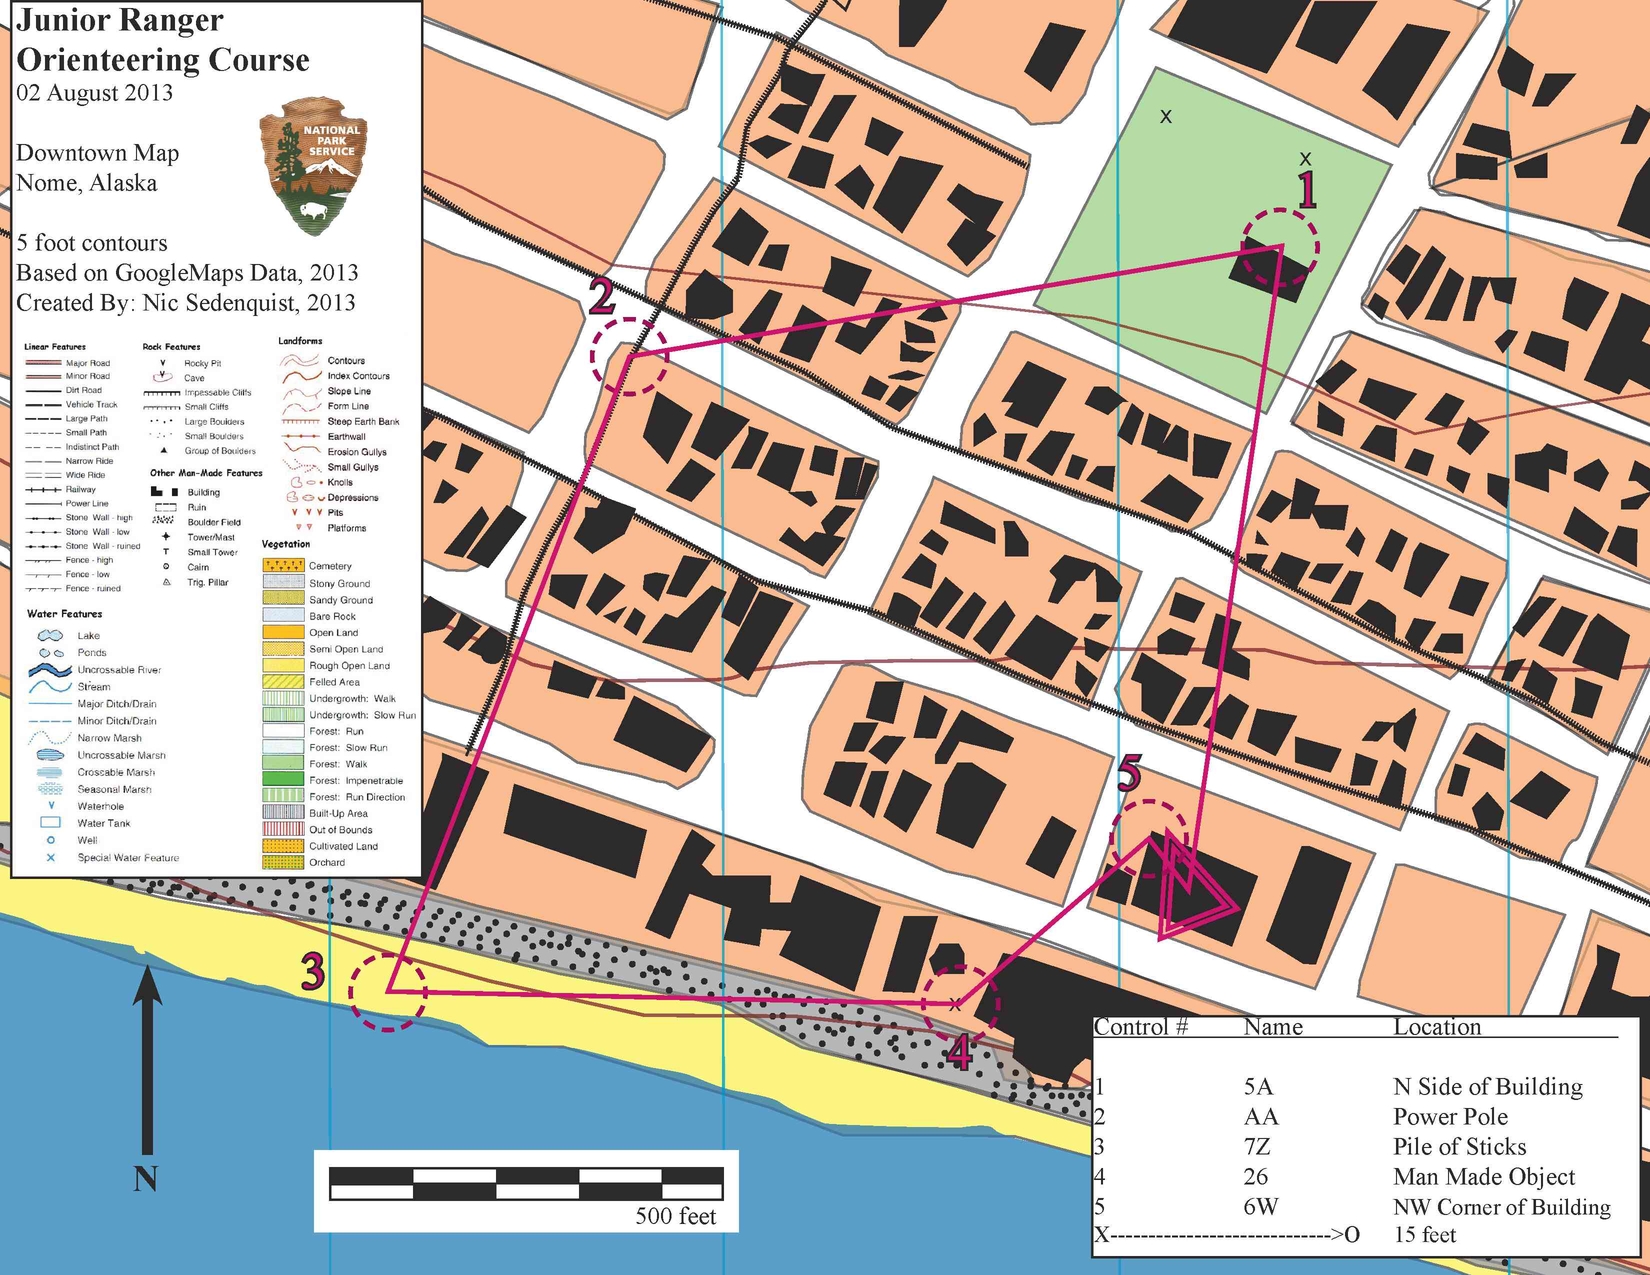 A multicolored orienteering map of downtown Nome created for a Junior Ranger activity